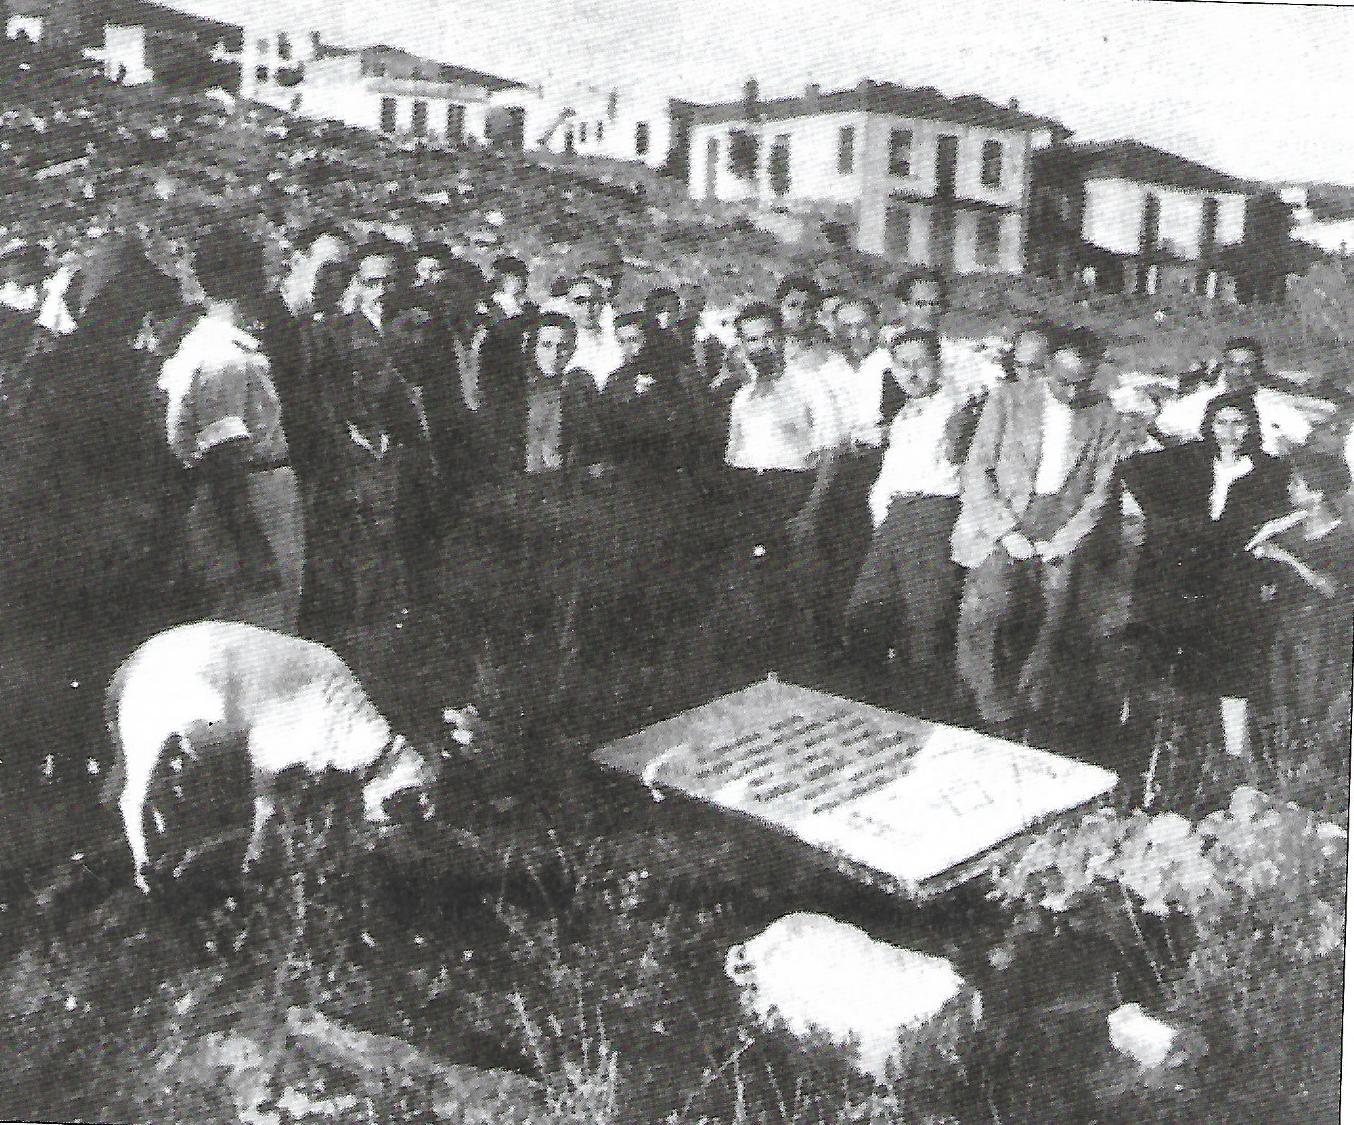 SALONICA 1945 MEMORIAL SERVICE IN THE LOOTED JEWISH CEMETERY